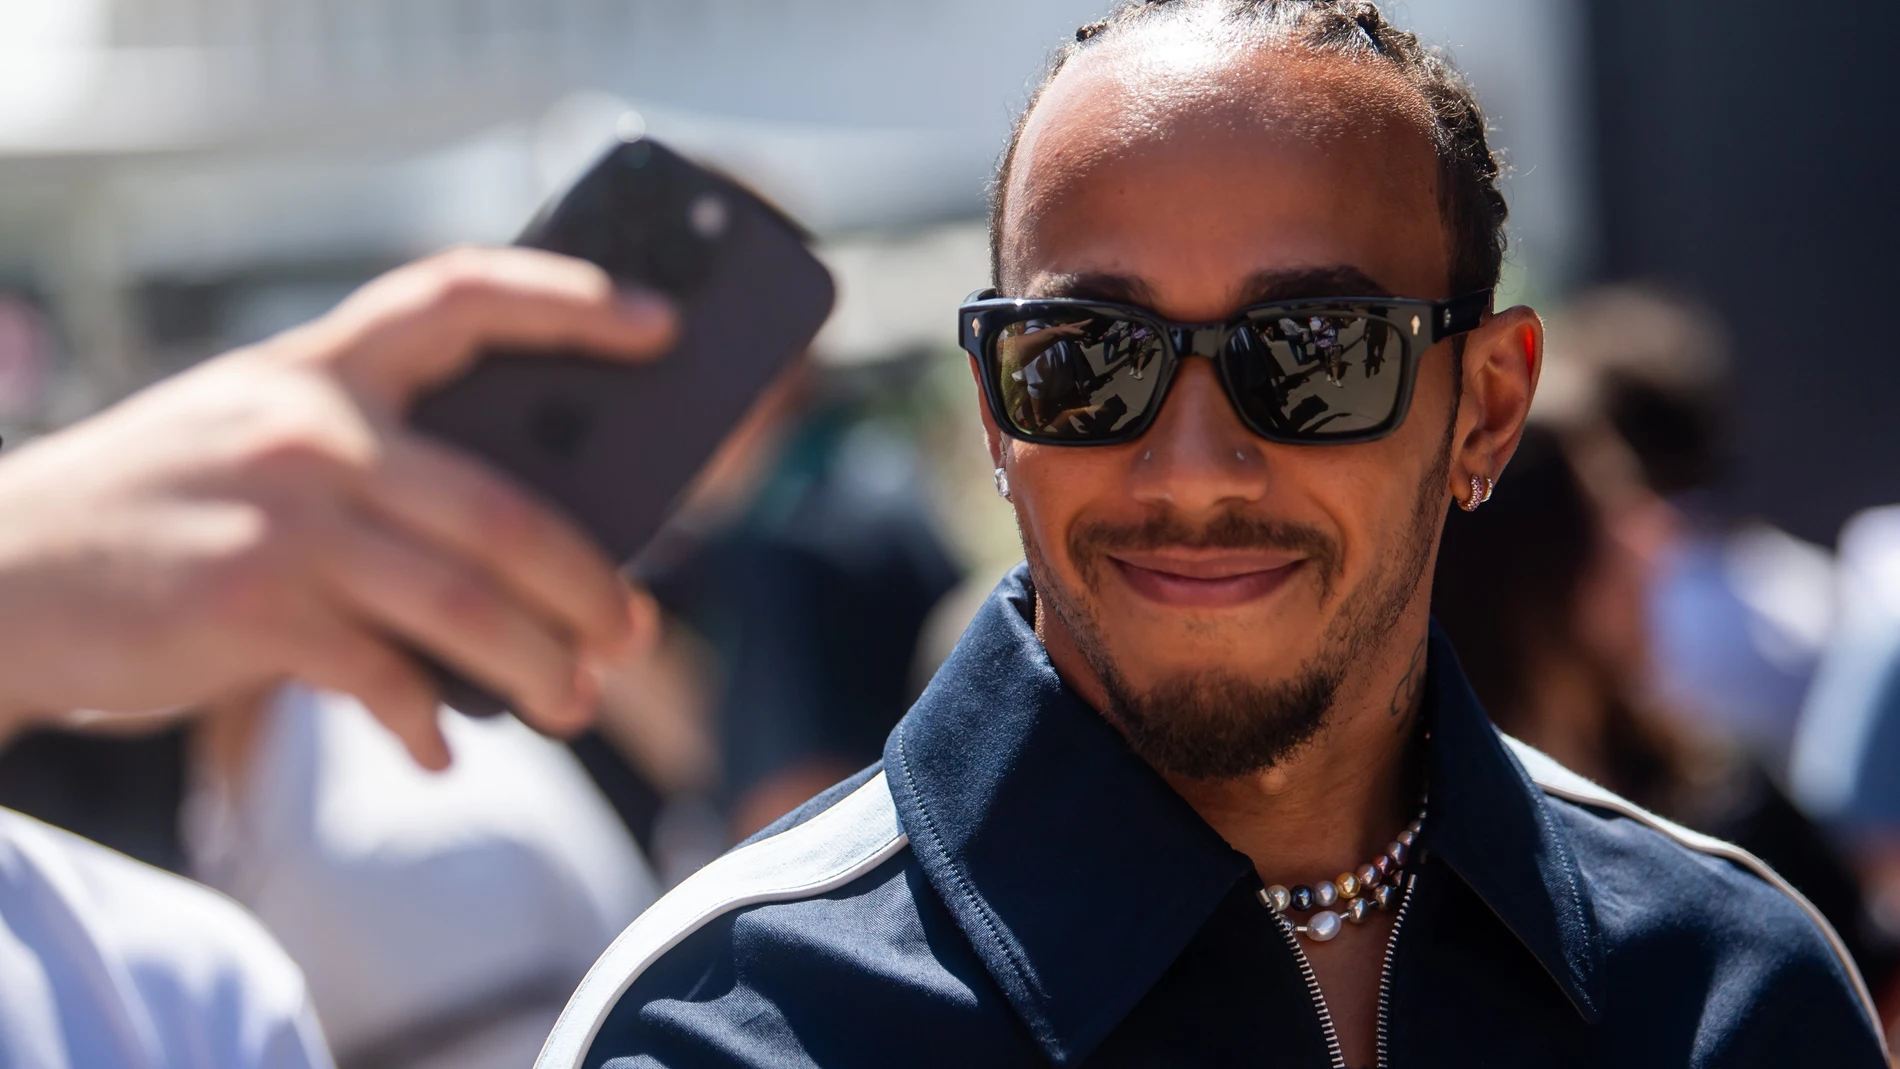 Mogyorod (Hungary), 22/07/2023.- (FILE) - Mercedes-AMG Petronas driver Lewis Hamilton of Britain arrives for the third practice session at the Hungaroring Circuit race track in Mogyorod, near Budapest, Hungary, 22 July 2023 (reissued 01 February 2024). British driver Lewis Hamilton will leave Mercedes-AMG Petronas after the upcoming 2024 season and sign with Scuderia Ferrari from 2025 on. The 39-year-old seven-times world champion's move was announced by Scuderia Ferrari in a statement on 01 ...